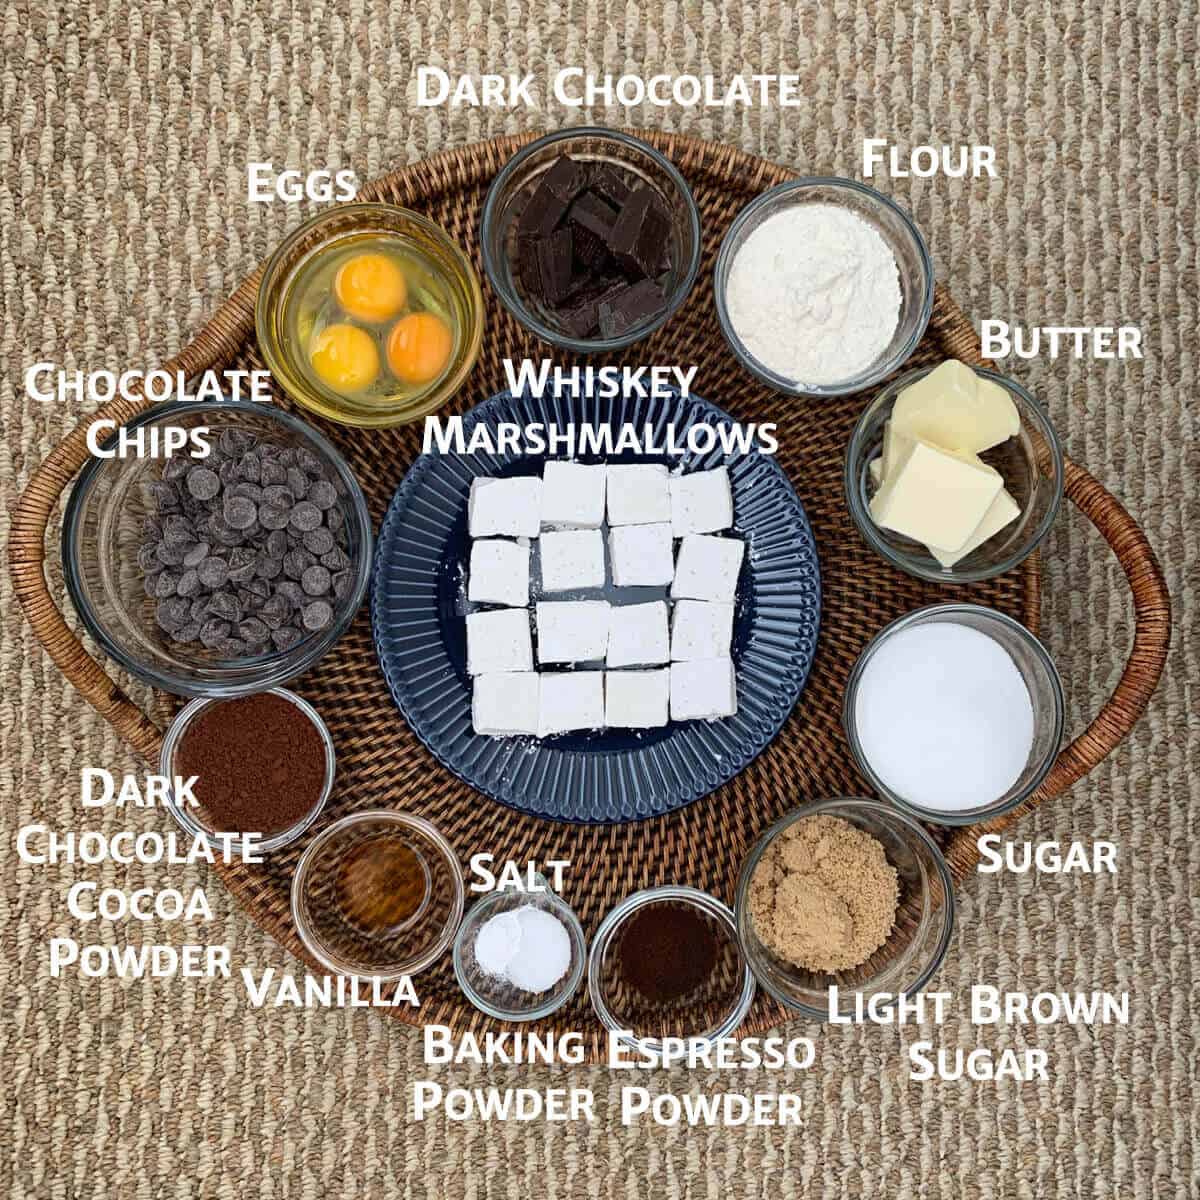 Whiskey Marshmallow Brownie ingredients portioned into bowls on a woven tray.